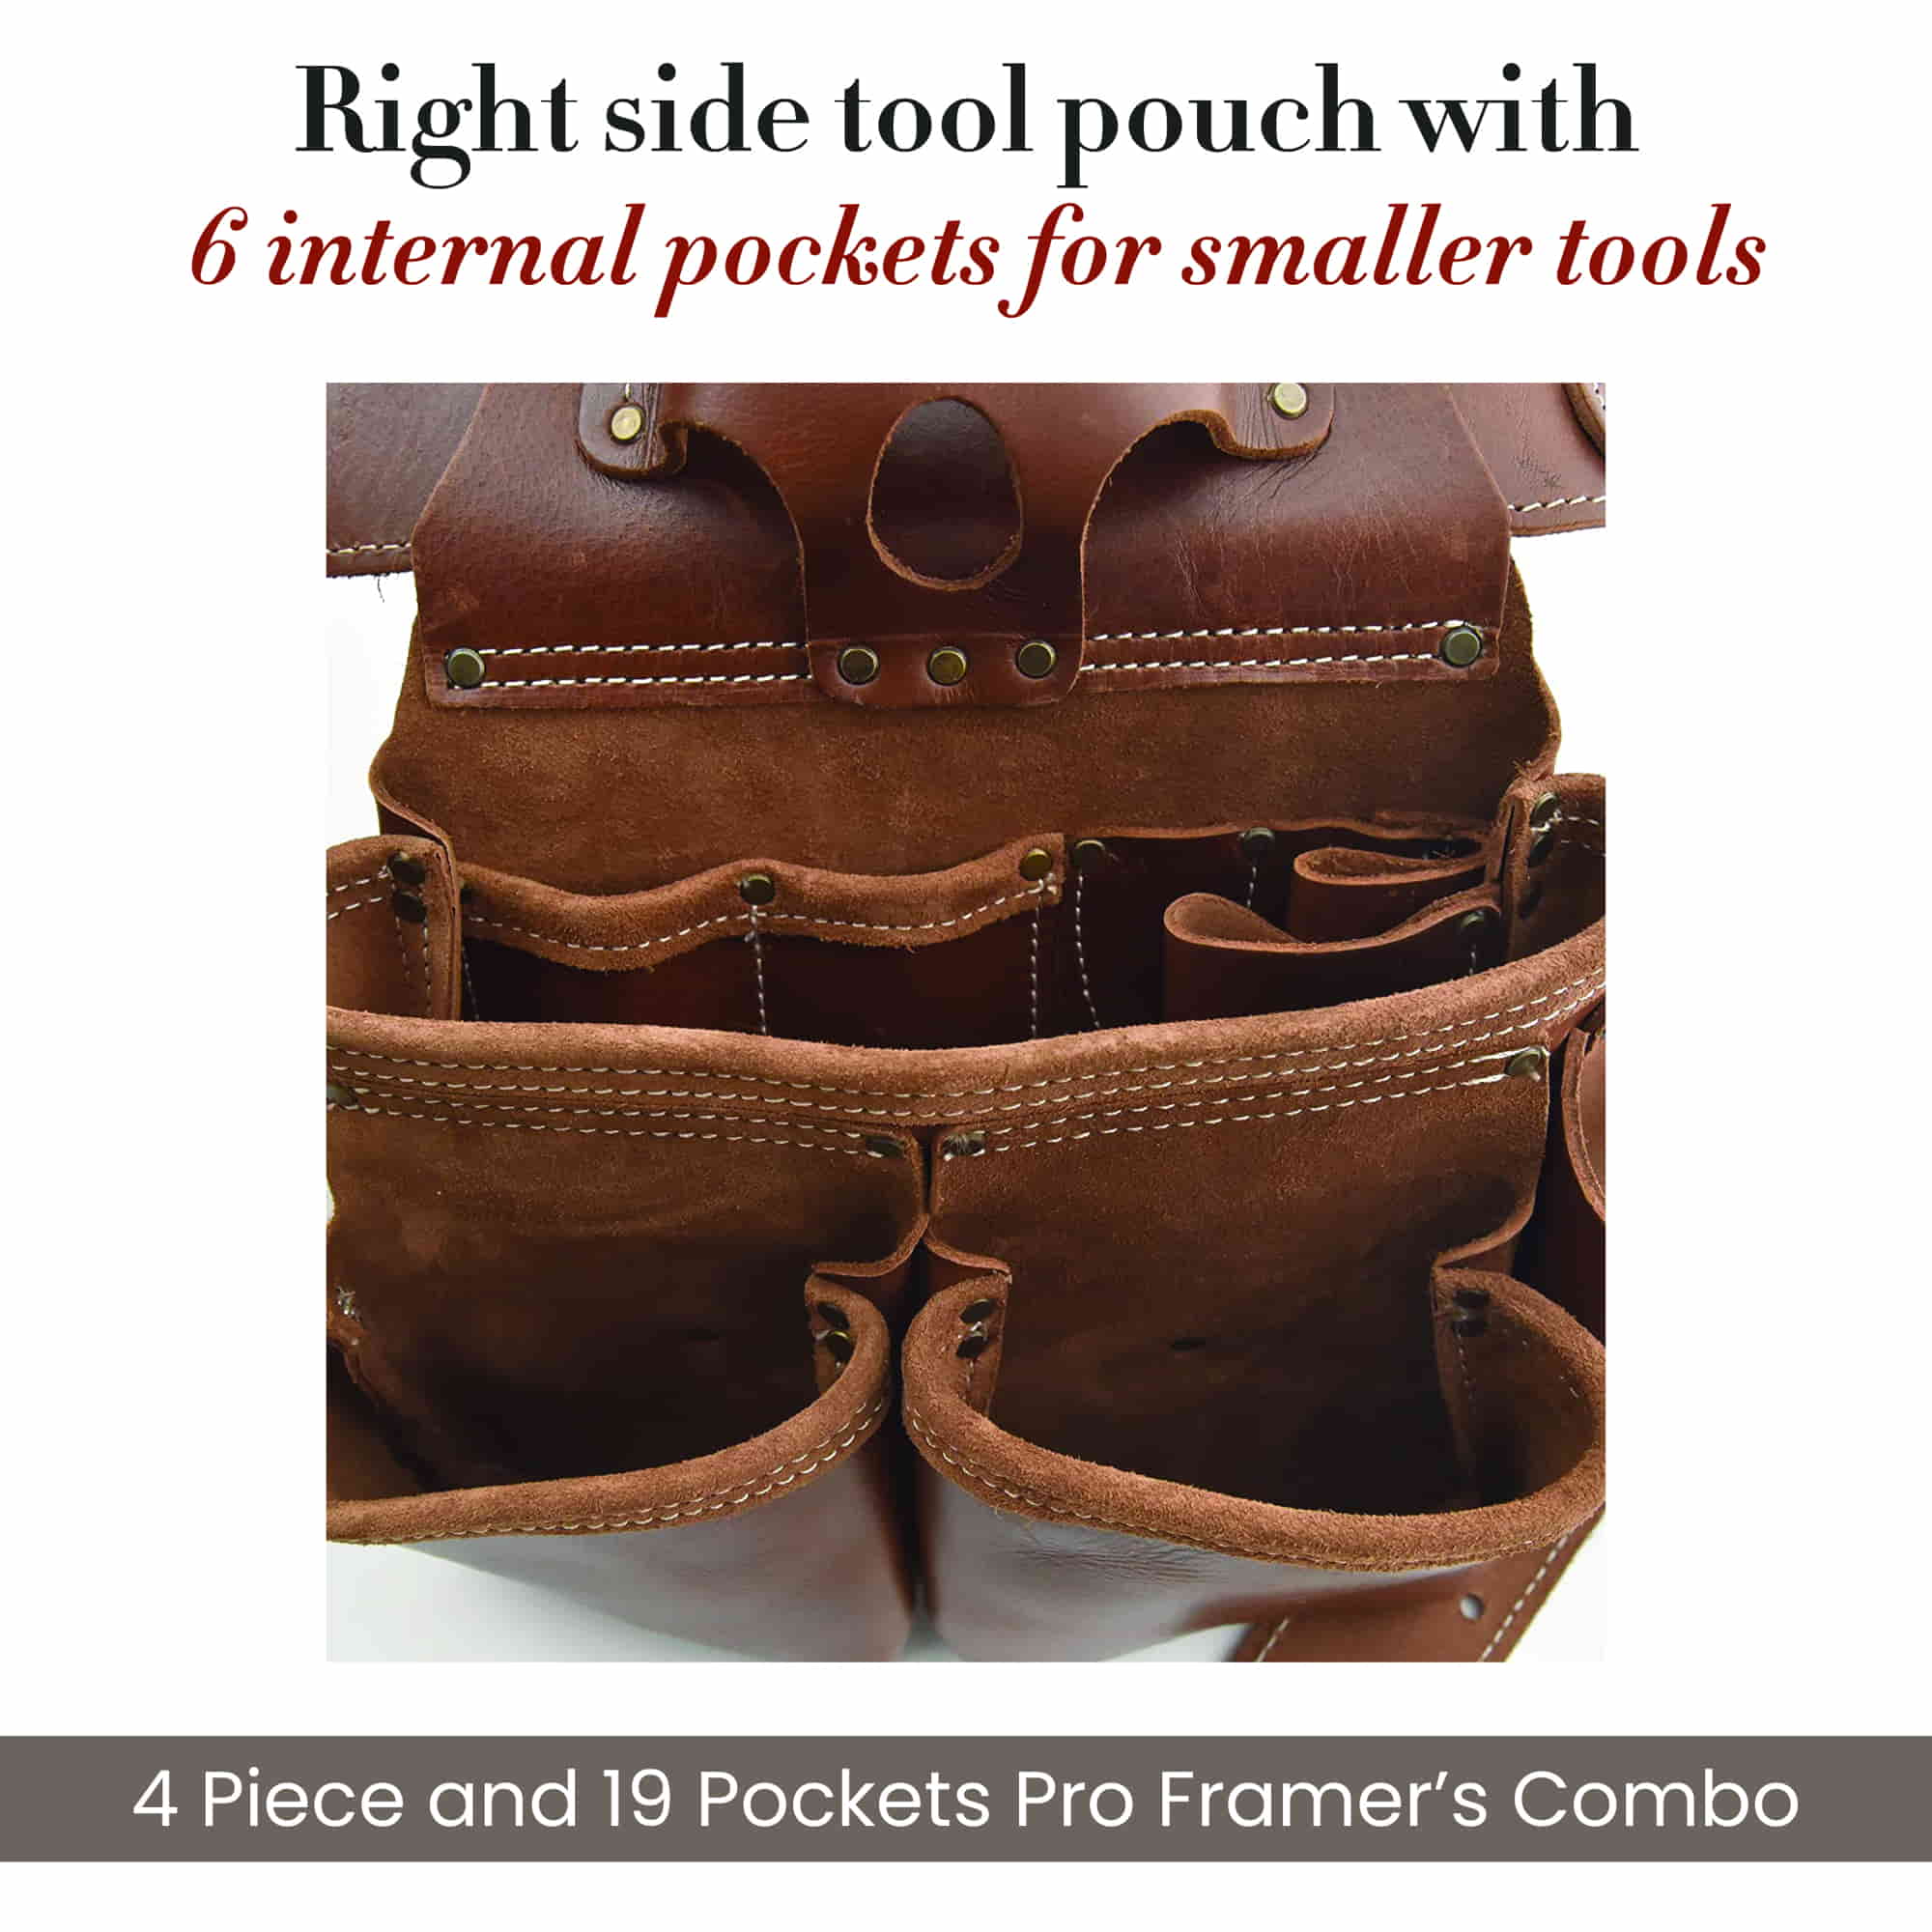 4 Piece 19 Pocket Framer's Combo in Grain Leather | Style n Craft